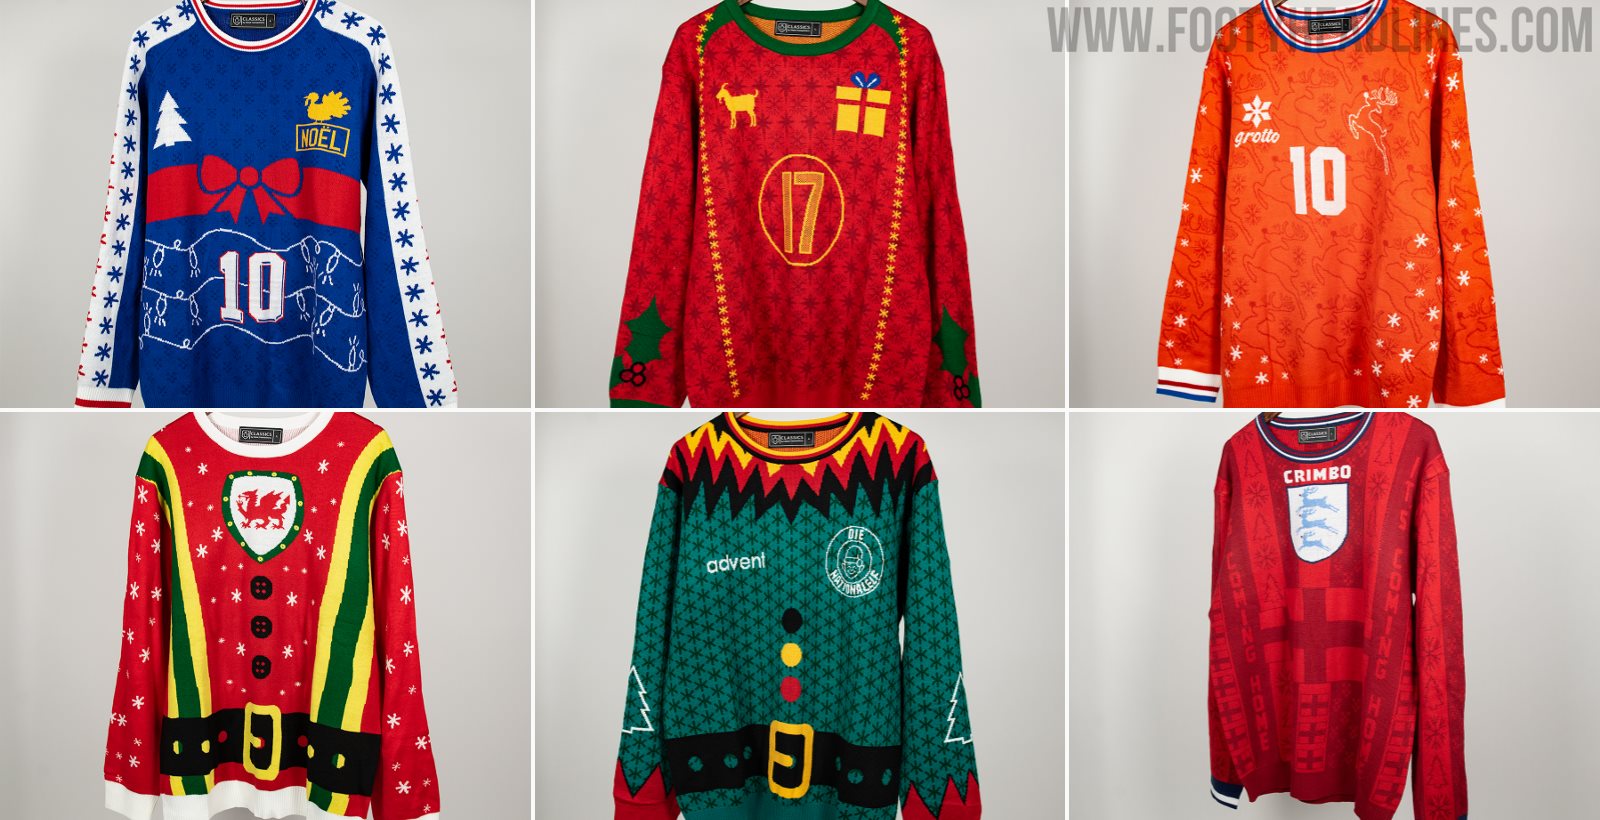 Epl Liverpool Christmas Sweater